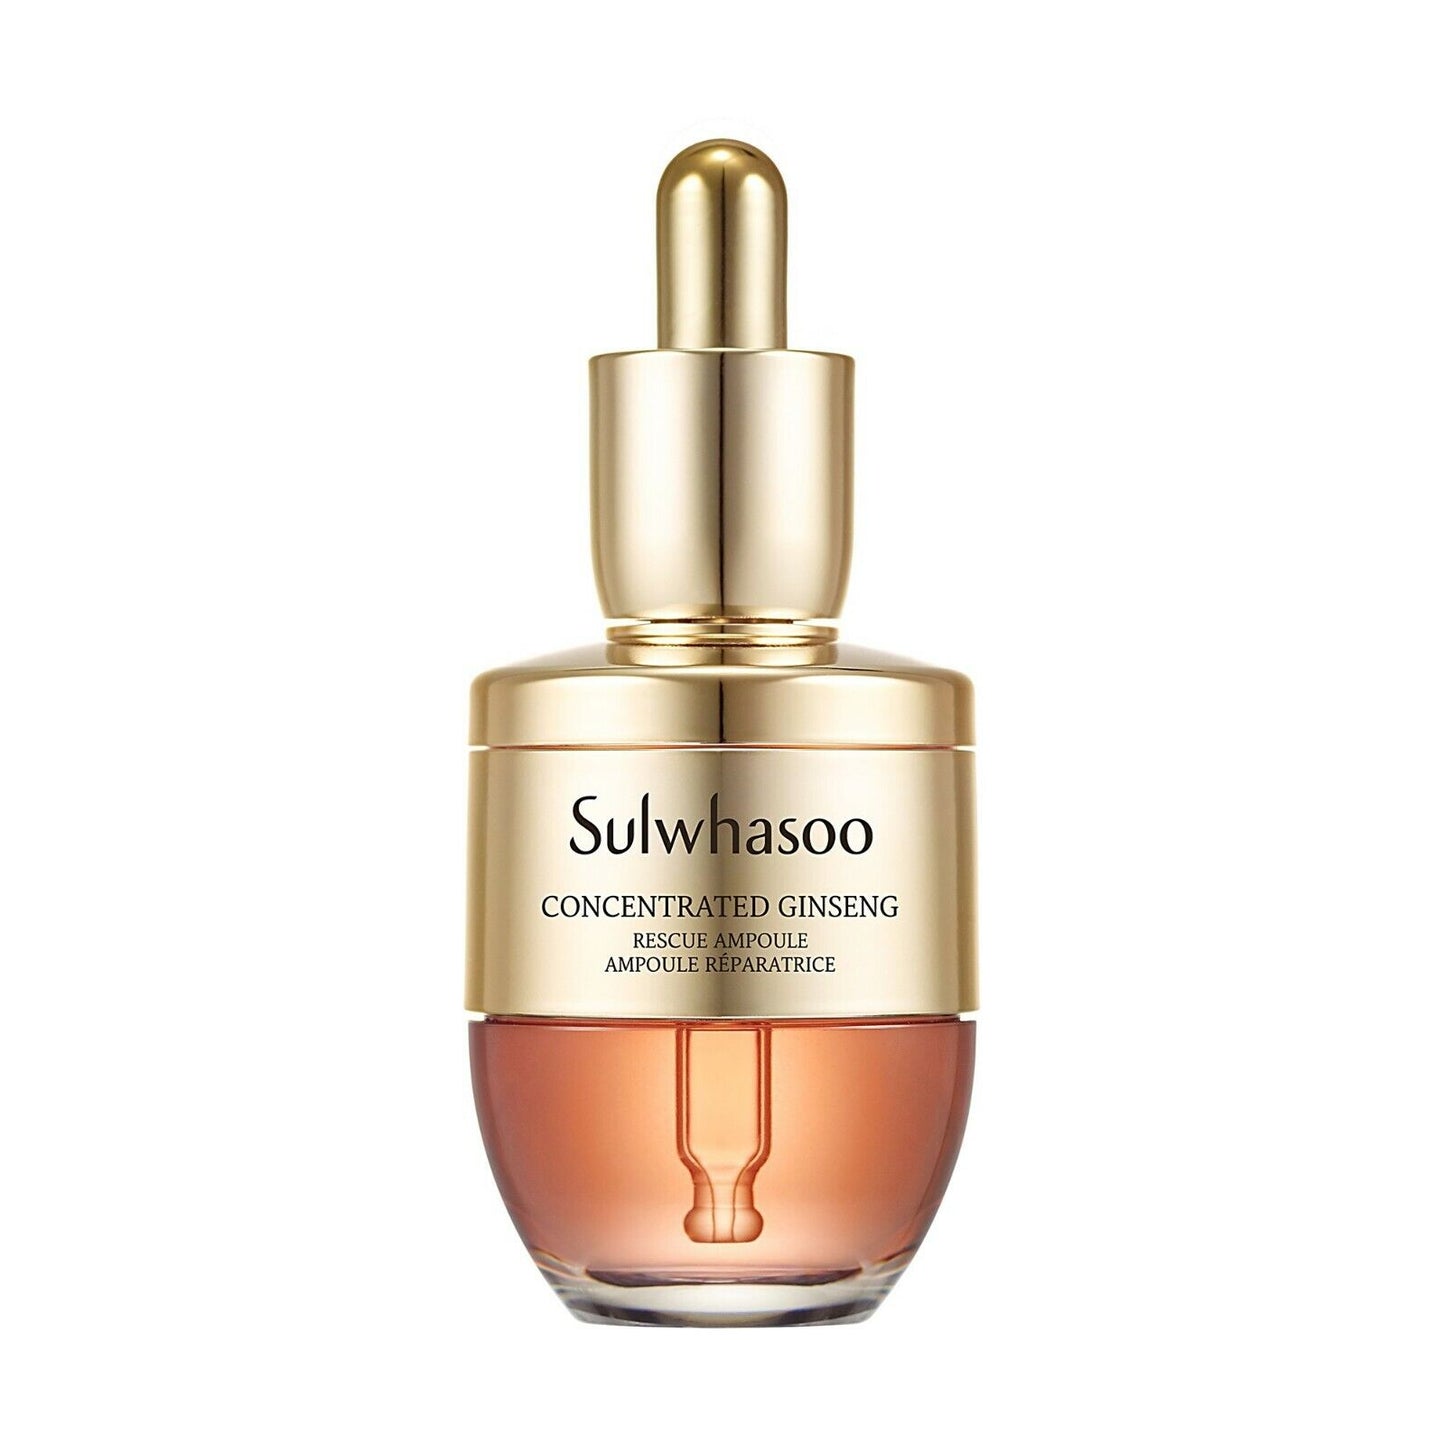 Sulwhasoo Concentrated Ginseng Rescue Ampoule 20g Set/Kits+Creamy Cleansing Foam 60g